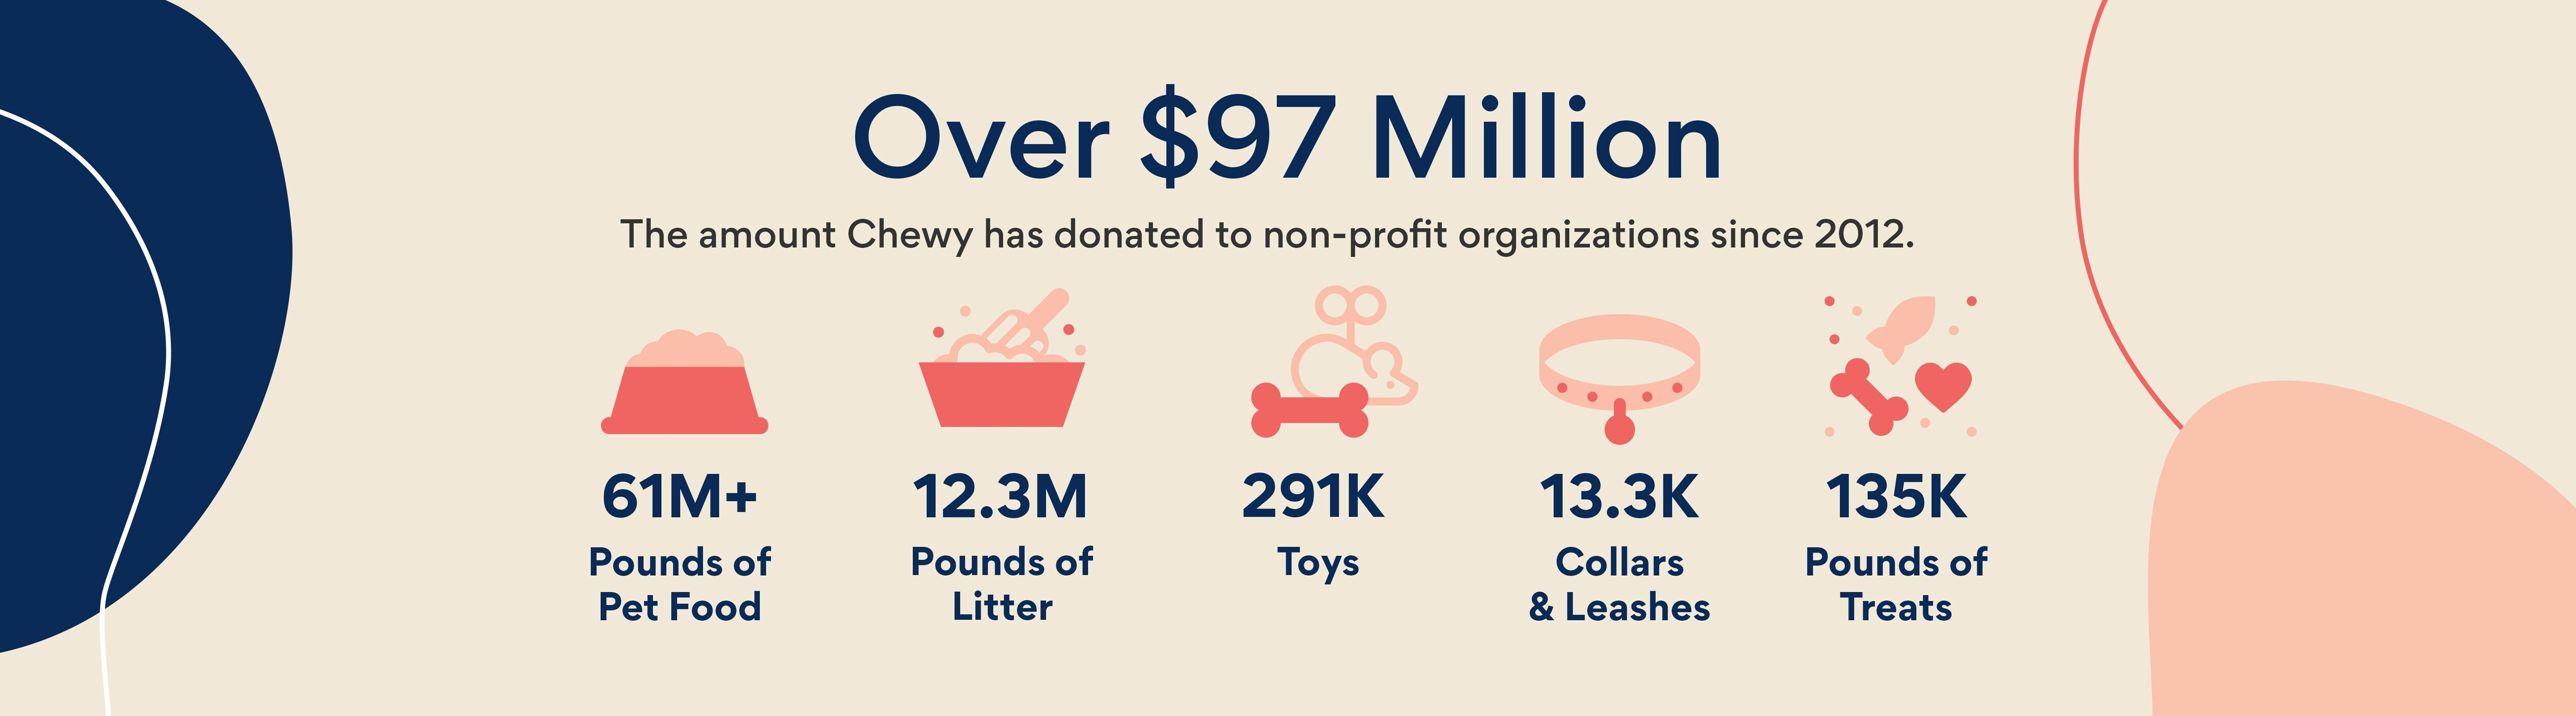 Over 97 million dollars. The amount Chewy has donated to non-profit organizations since 2012.